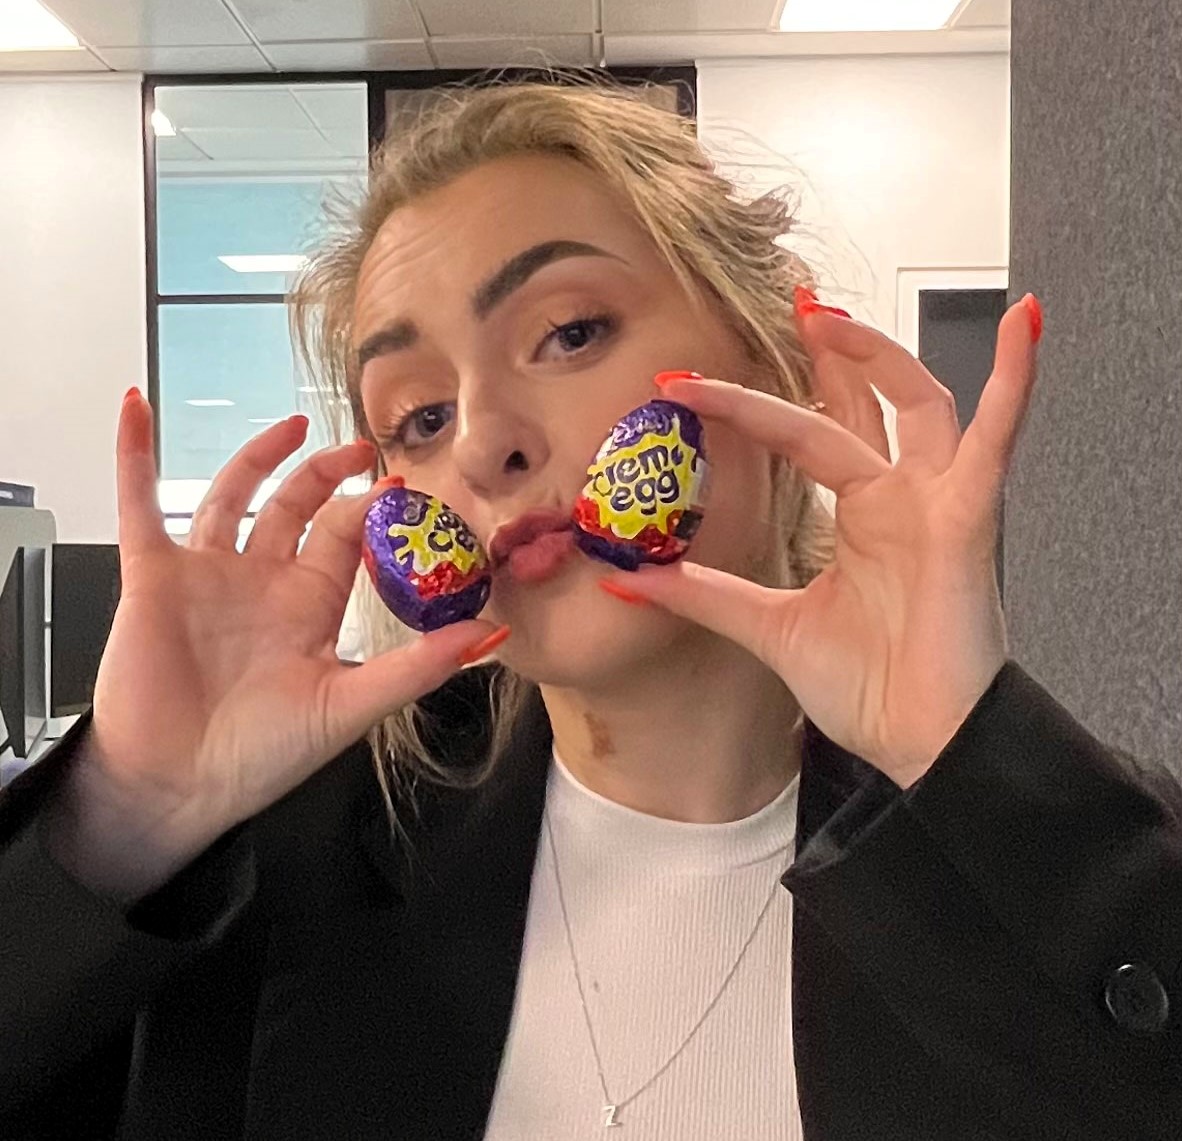 A Creme Egg super fan devours 100 this year, craving more. Zara Winstanley's love sparked in Australia, now she's on a daily egg spree.